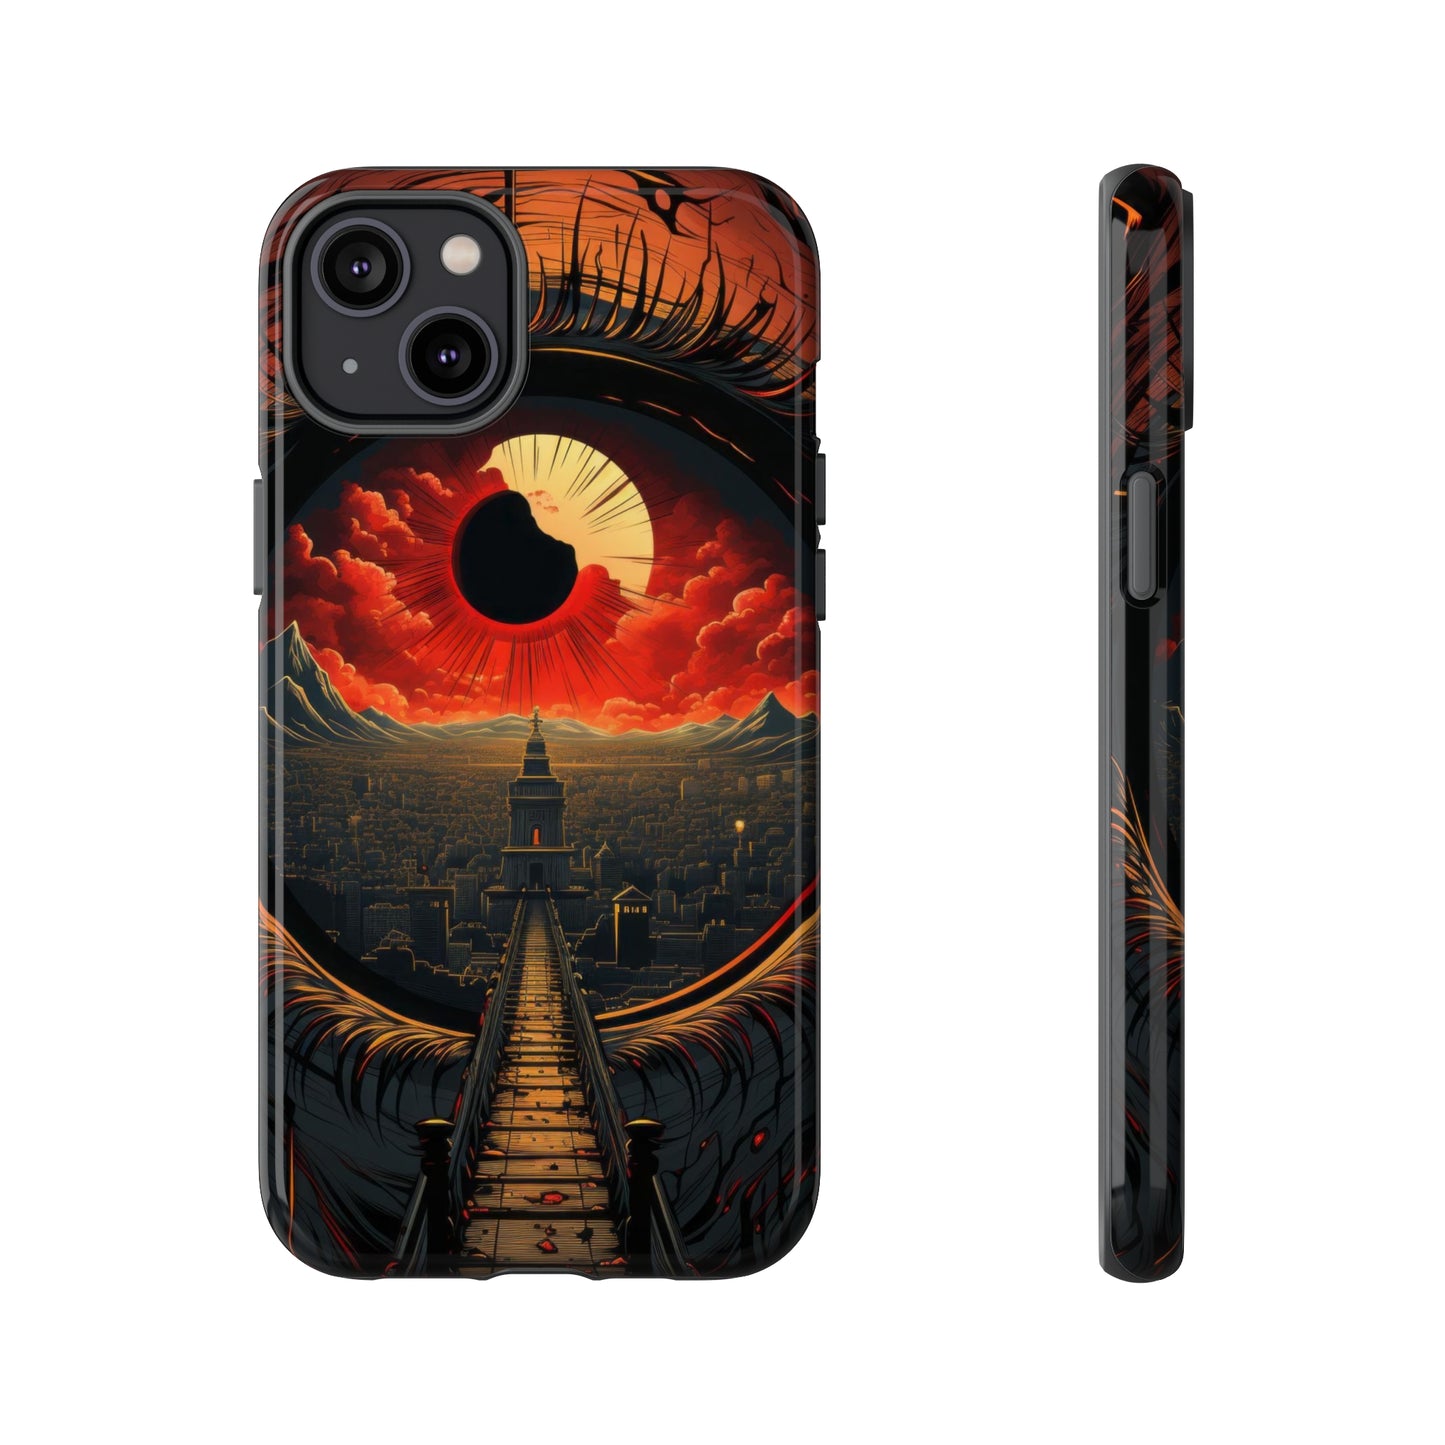 Red Eye Odyssey: Bridge to Enigma City Phone Case for iPhone, Samsung, Pixel